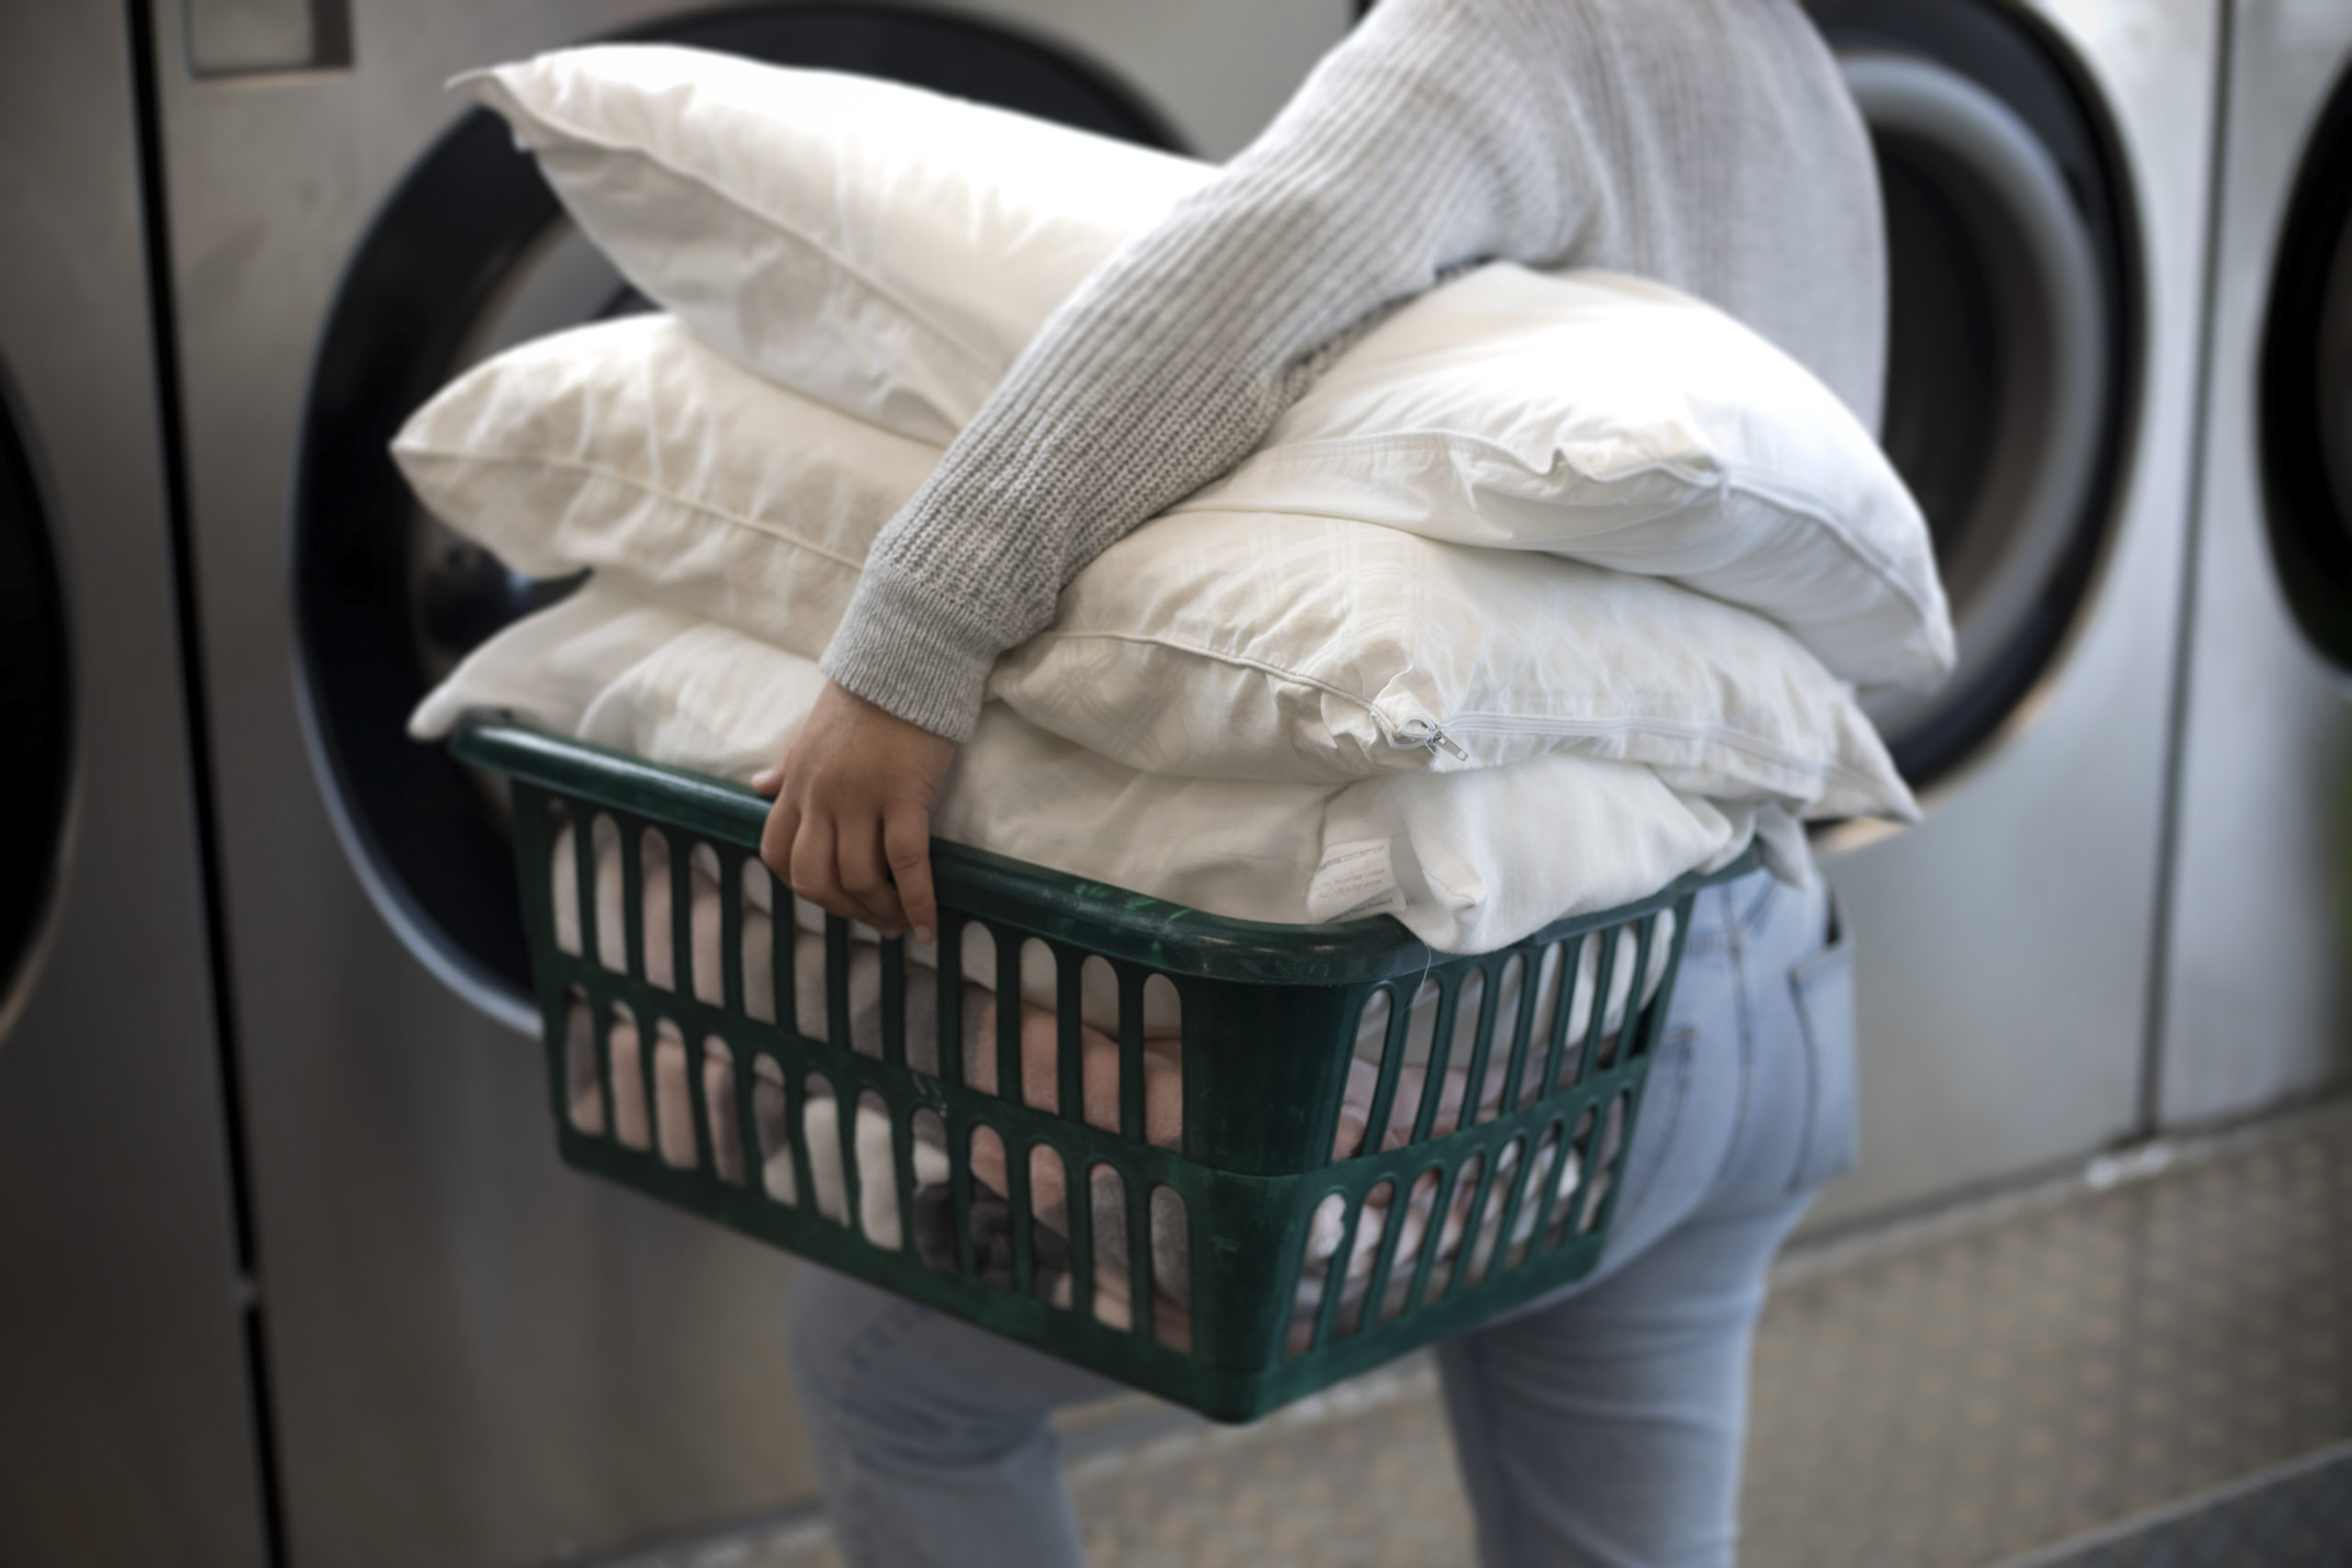 How to Wash Pillows at the Laundromat